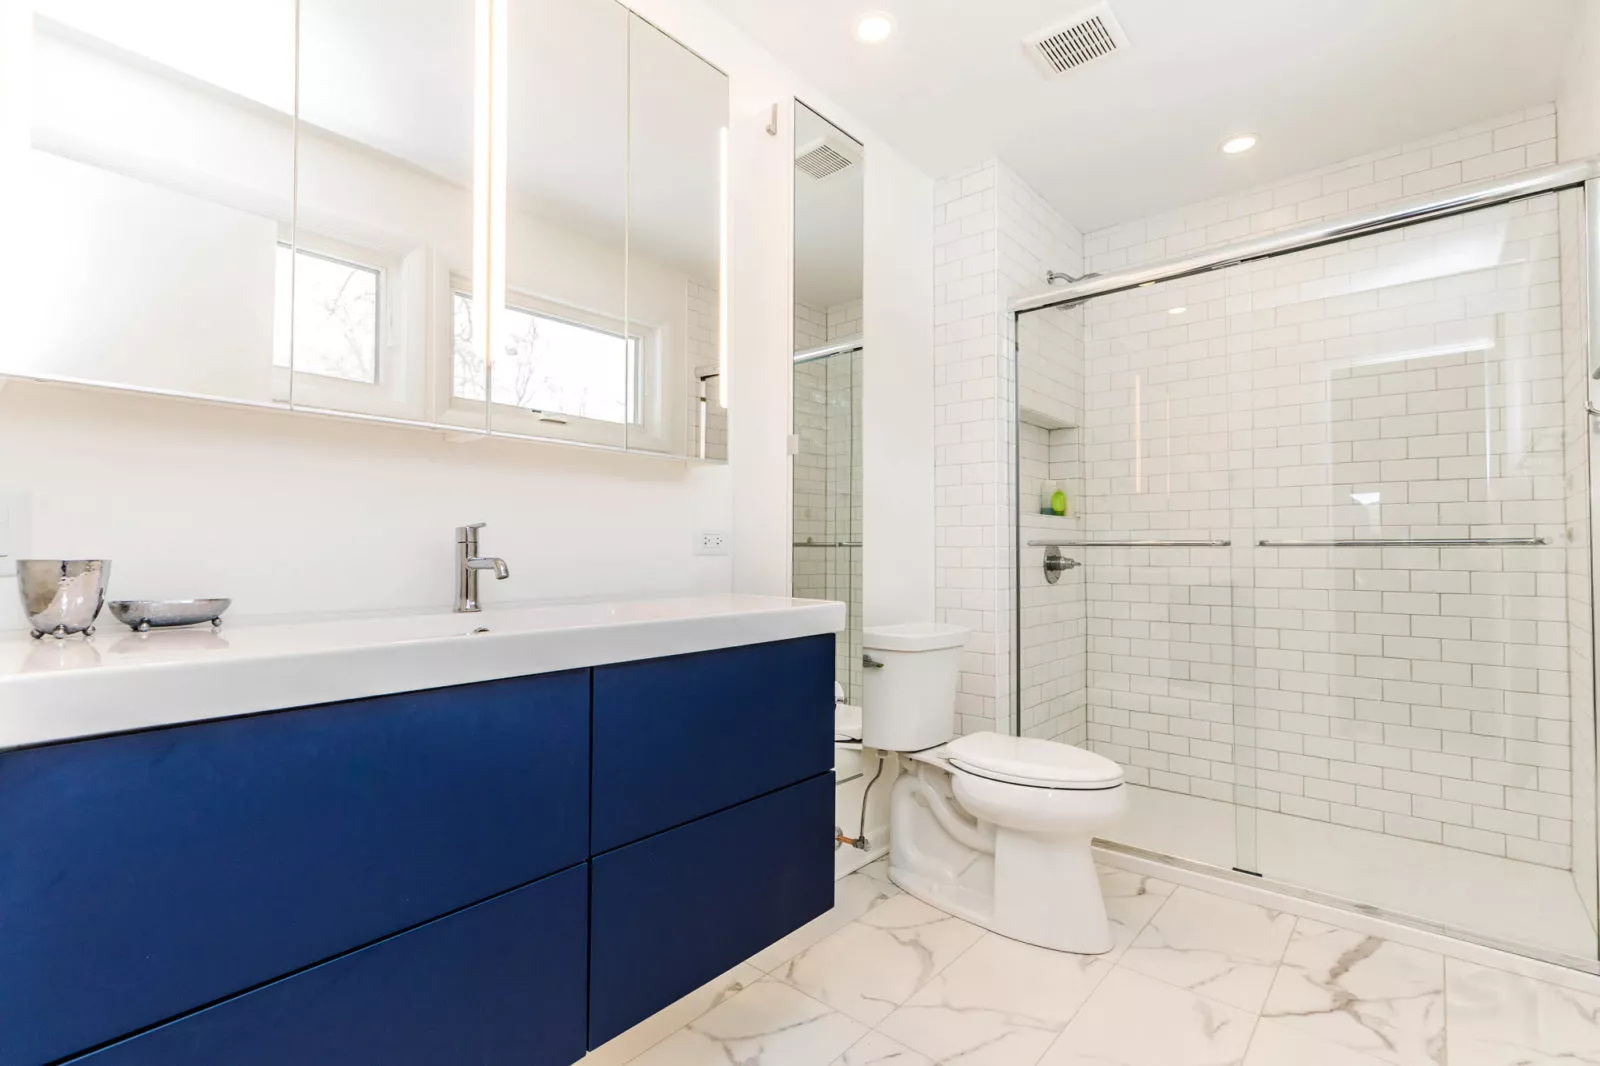 bathroom renovation blue cabinetry glass shower marble flooring subway tile mirror cabinetry